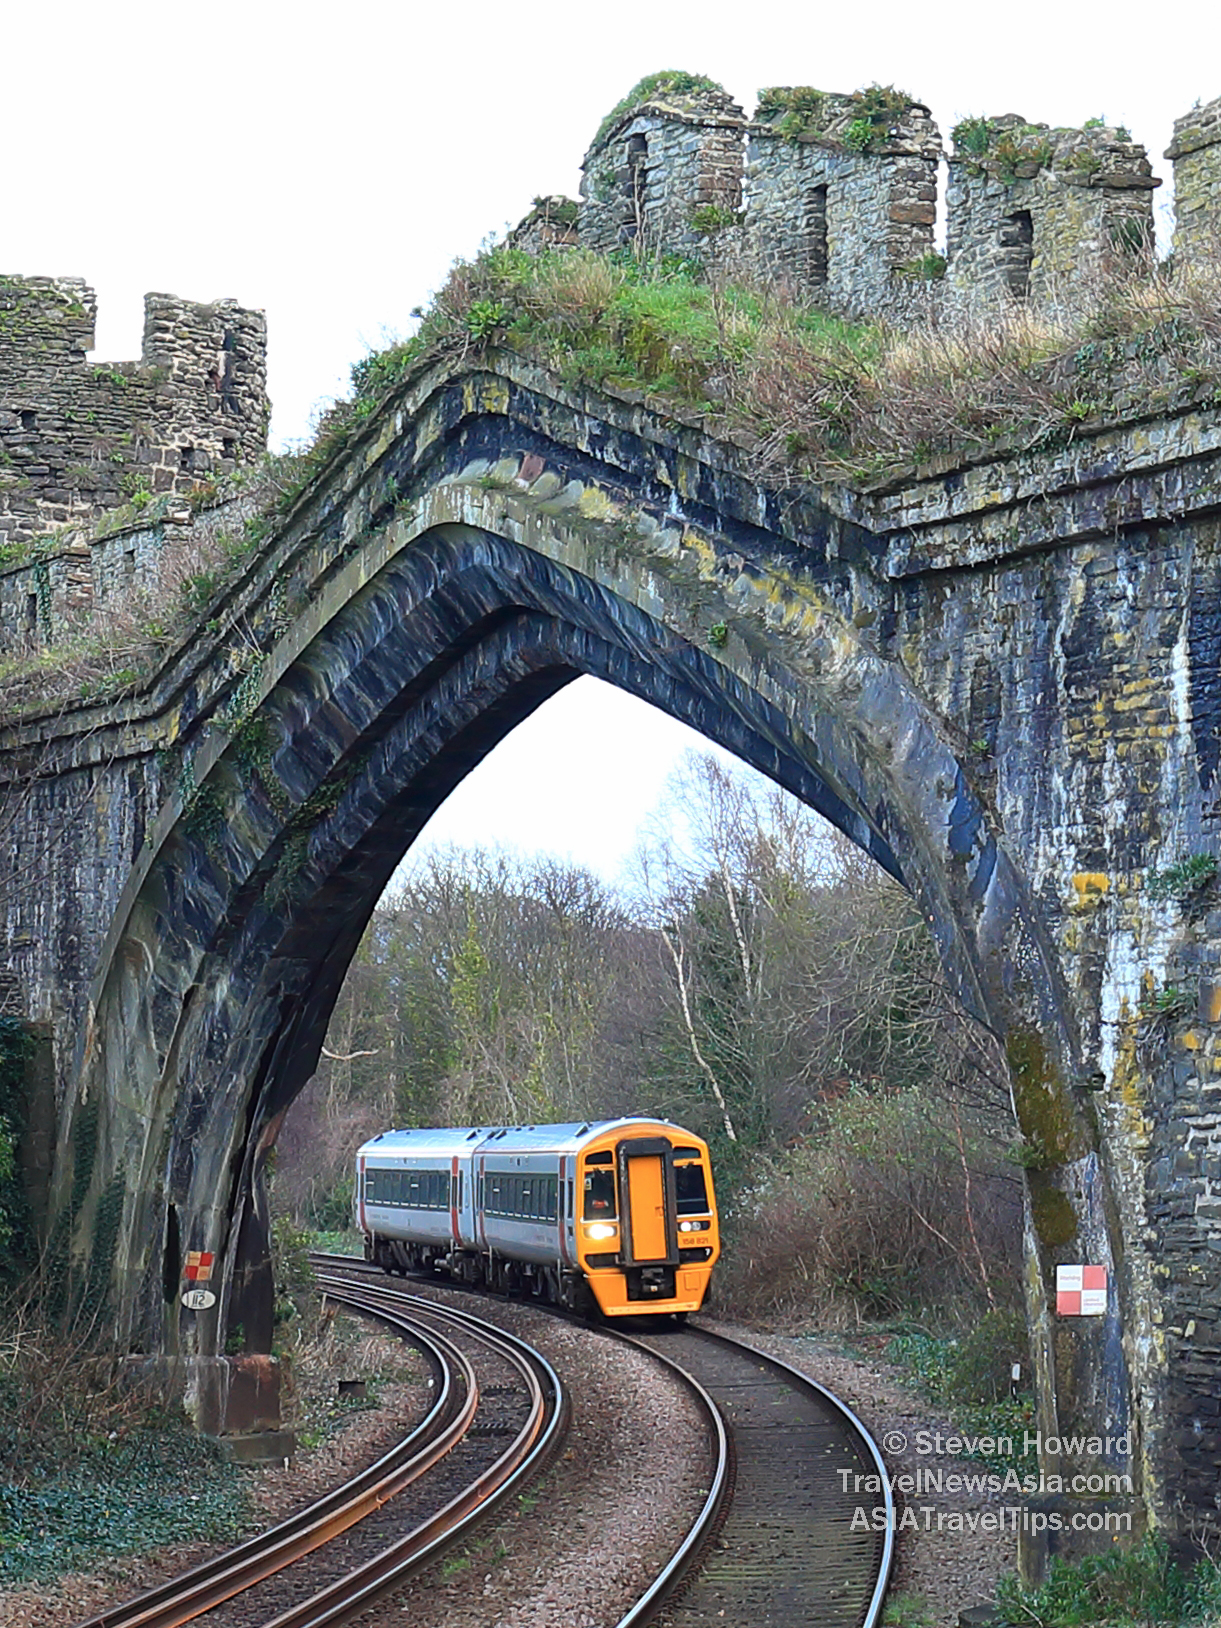 Train in Conwy, North Wales. Picture by Steven Howard of TravelNewsAsia.com Click to enlarge.